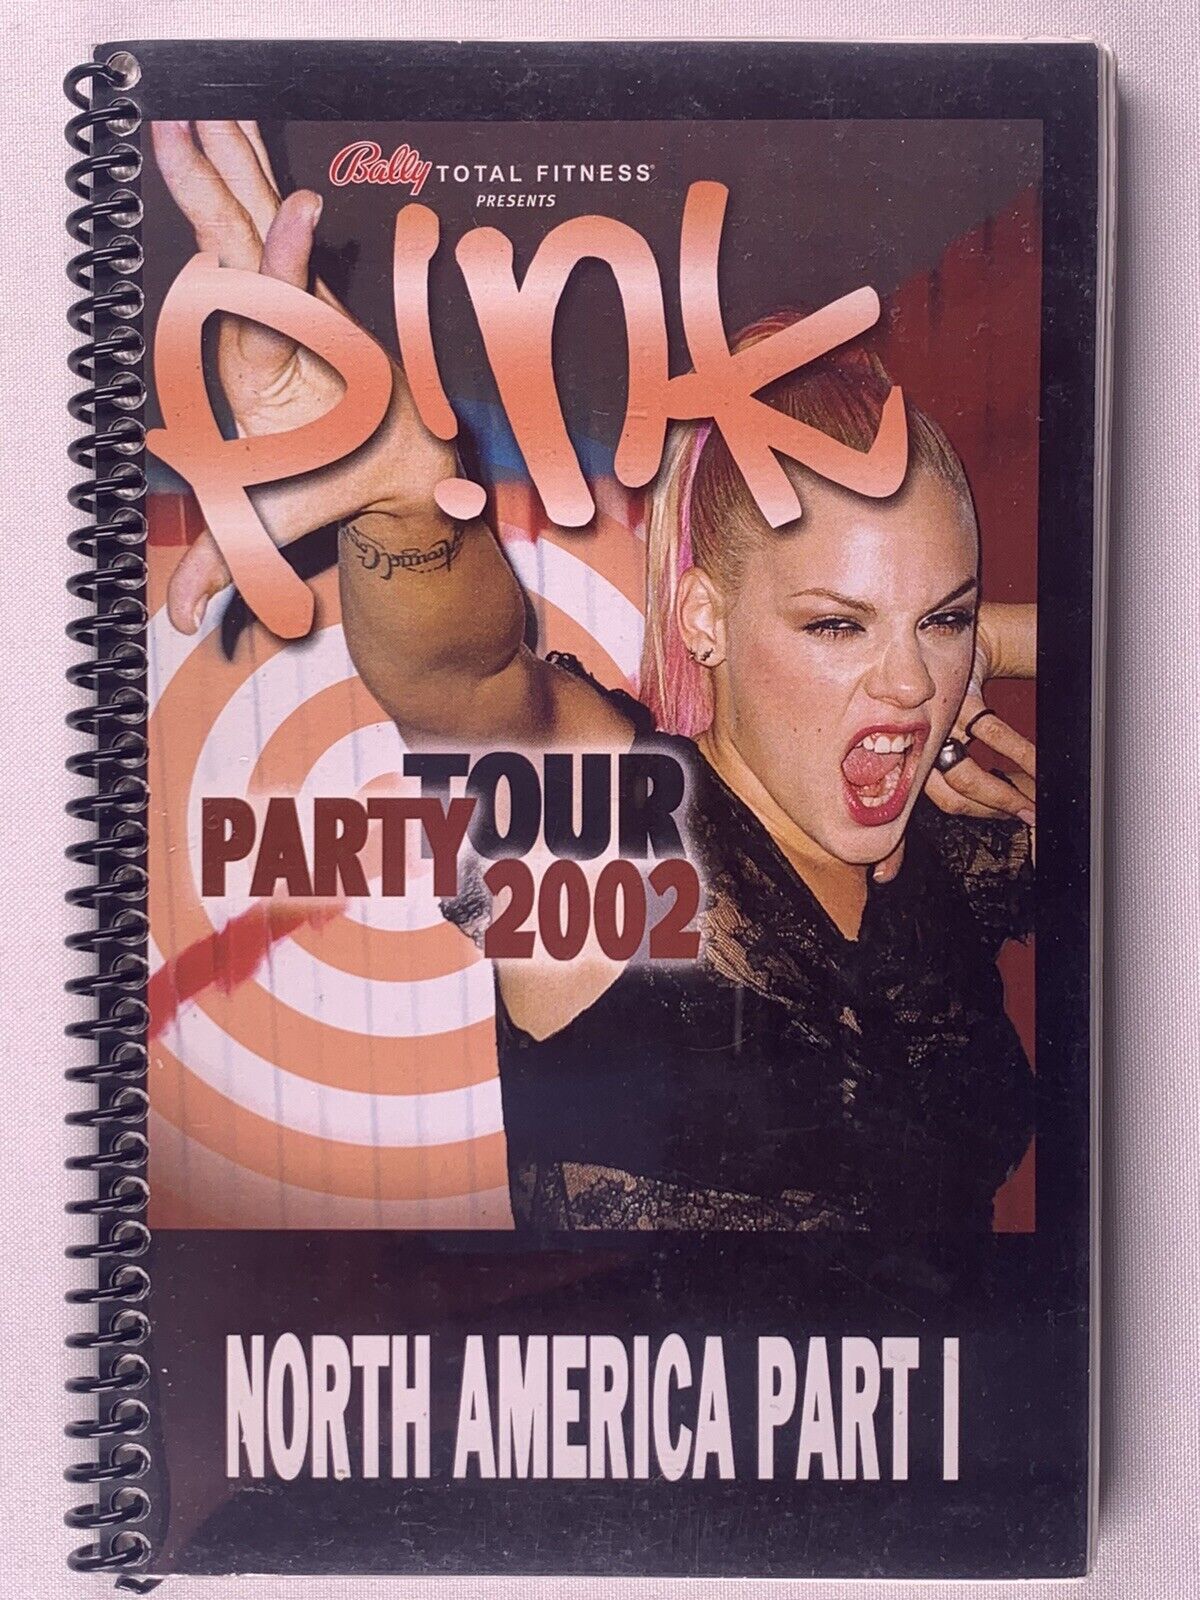 Pink Itinerary Original Vintage North American Party Tour Part I 2002